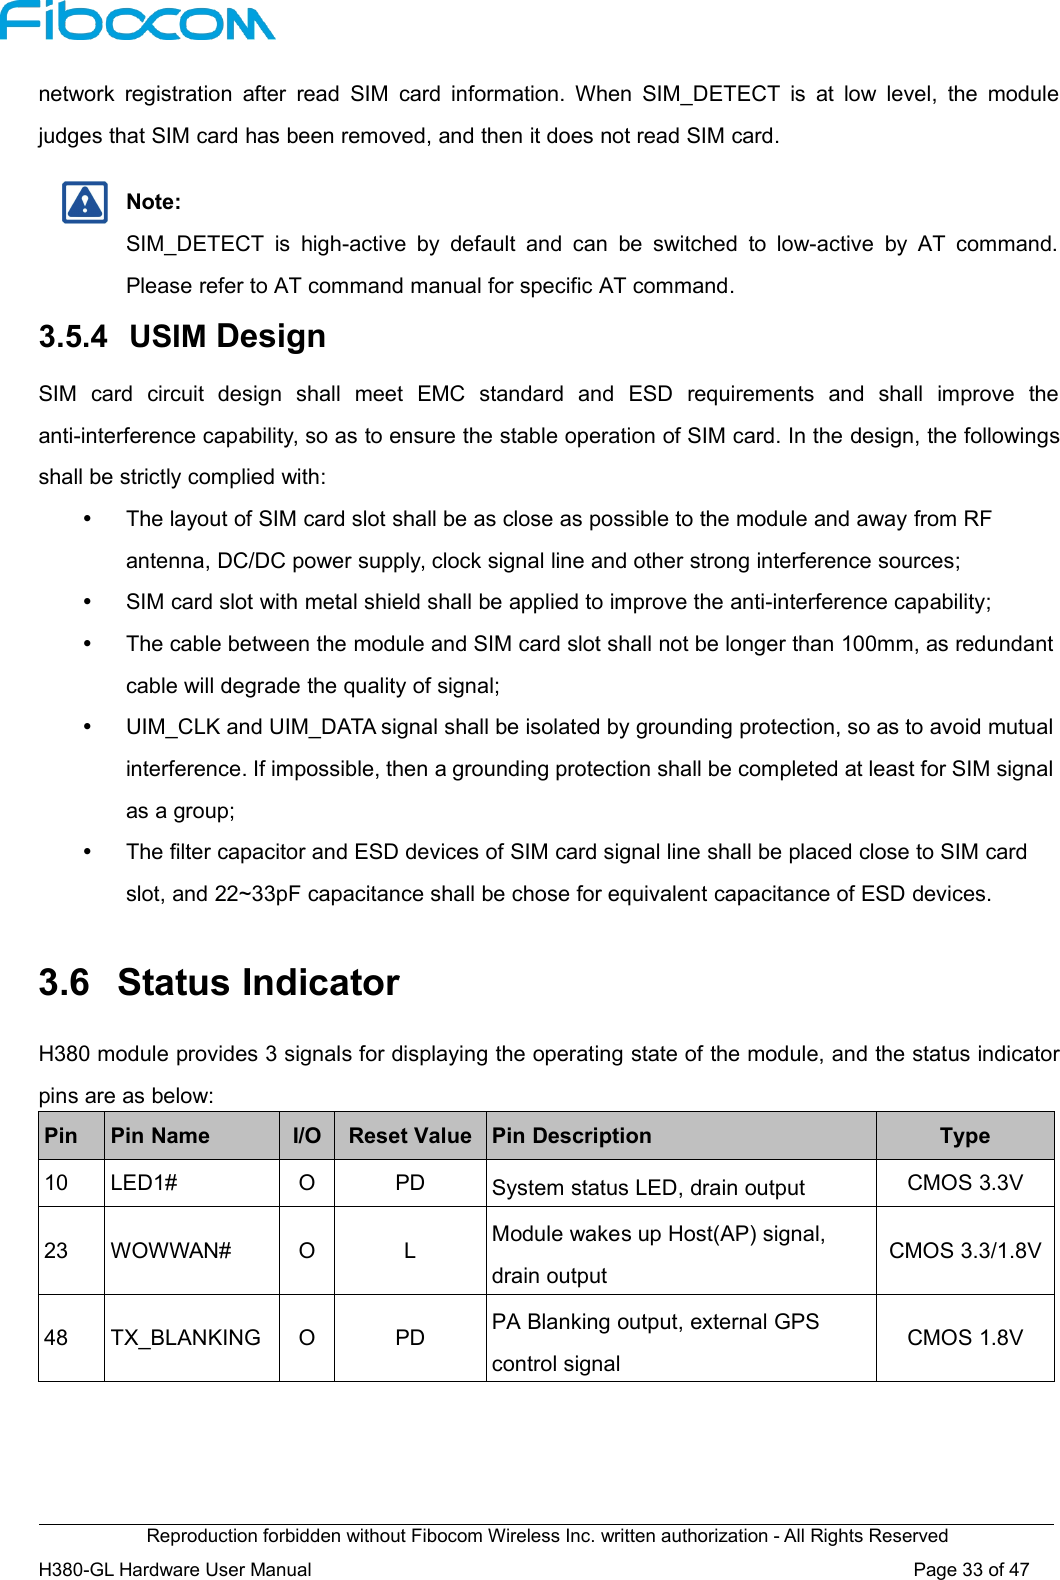 Reproduction forbidden without Fibocom Wireless Inc. written authorization - All Rights ReservedH380-GL Hardware User Manual Page33of47network registration after read SIM card information. When SIM_DETECT is at low level, the modulejudges that SIM card has been removed, and then it does not read SIM card.Note:SIM_DETECT is high-active by default and can be switched to low-active by AT command.Please refer to AT command manual for specific AT command.3.5.4 USIM DesignSIM card circuit design shall meet EMC standard and ESD requirements and shall improve theanti-interference capability, so as to ensure the stable operation of SIM card. In the design, the followingsshall be strictly complied with:The layout of SIM card slot shall be as close as possible to the module and away from RFantenna, DC/DC power supply, clock signal line and other strong interference sources;SIM card slot with metal shield shall be applied to improve the anti-interference capability;The cable between the module and SIM card slot shall not be longer than 100mm, as redundantcable will degrade the quality of signal;UIM_CLK and UIM_DATA signal shall be isolated by grounding protection, so as to avoid mutualinterference. If impossible, then a grounding protection shall be completed at least for SIM signalas a group;The filter capacitor and ESD devices of SIM card signal line shall be placed close to SIM cardslot, and 22~33pF capacitance shall be chose for equivalent capacitance of ESD devices.3.6 Status IndicatorH380 module provides 3 signals for displaying the operating state of the module, and the status indicatorpins are as below:PinPin NameI/OReset ValuePin DescriptionType10LED1#OPDSystem status LED, drain outputCMOS 3.3V23WOWWAN#OLModule wakes up Host(AP) signal,drain outputCMOS 3.3/1.8V48TX_BLANKINGOPDPA Blanking output, external GPScontrol signalCMOS 1.8V